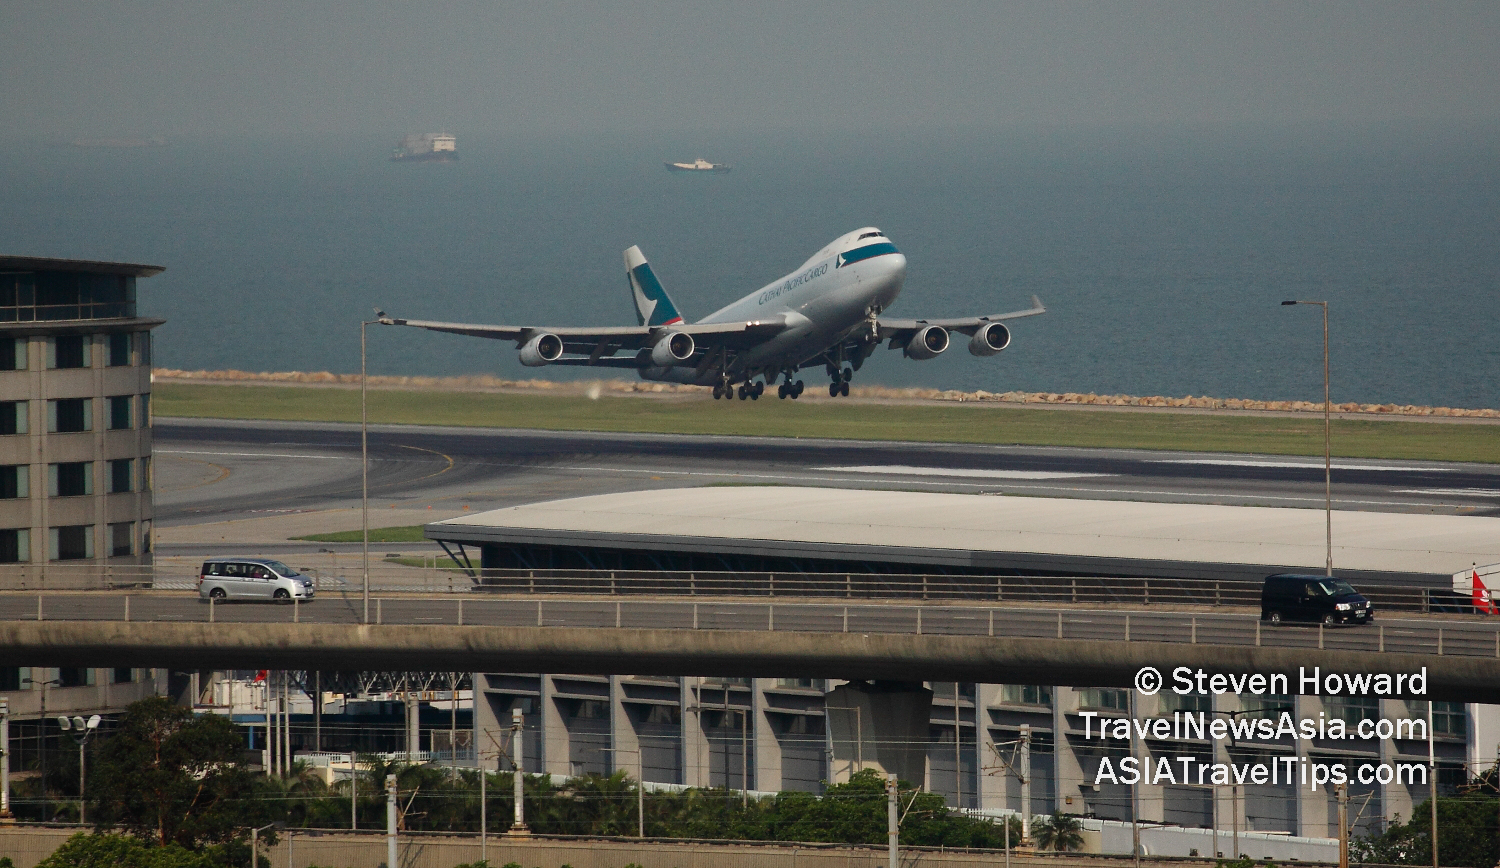 Hong Kong International Airport (HKIA). Picture by Steven Howard of TravelNewsAsia.com Click to enlarge.